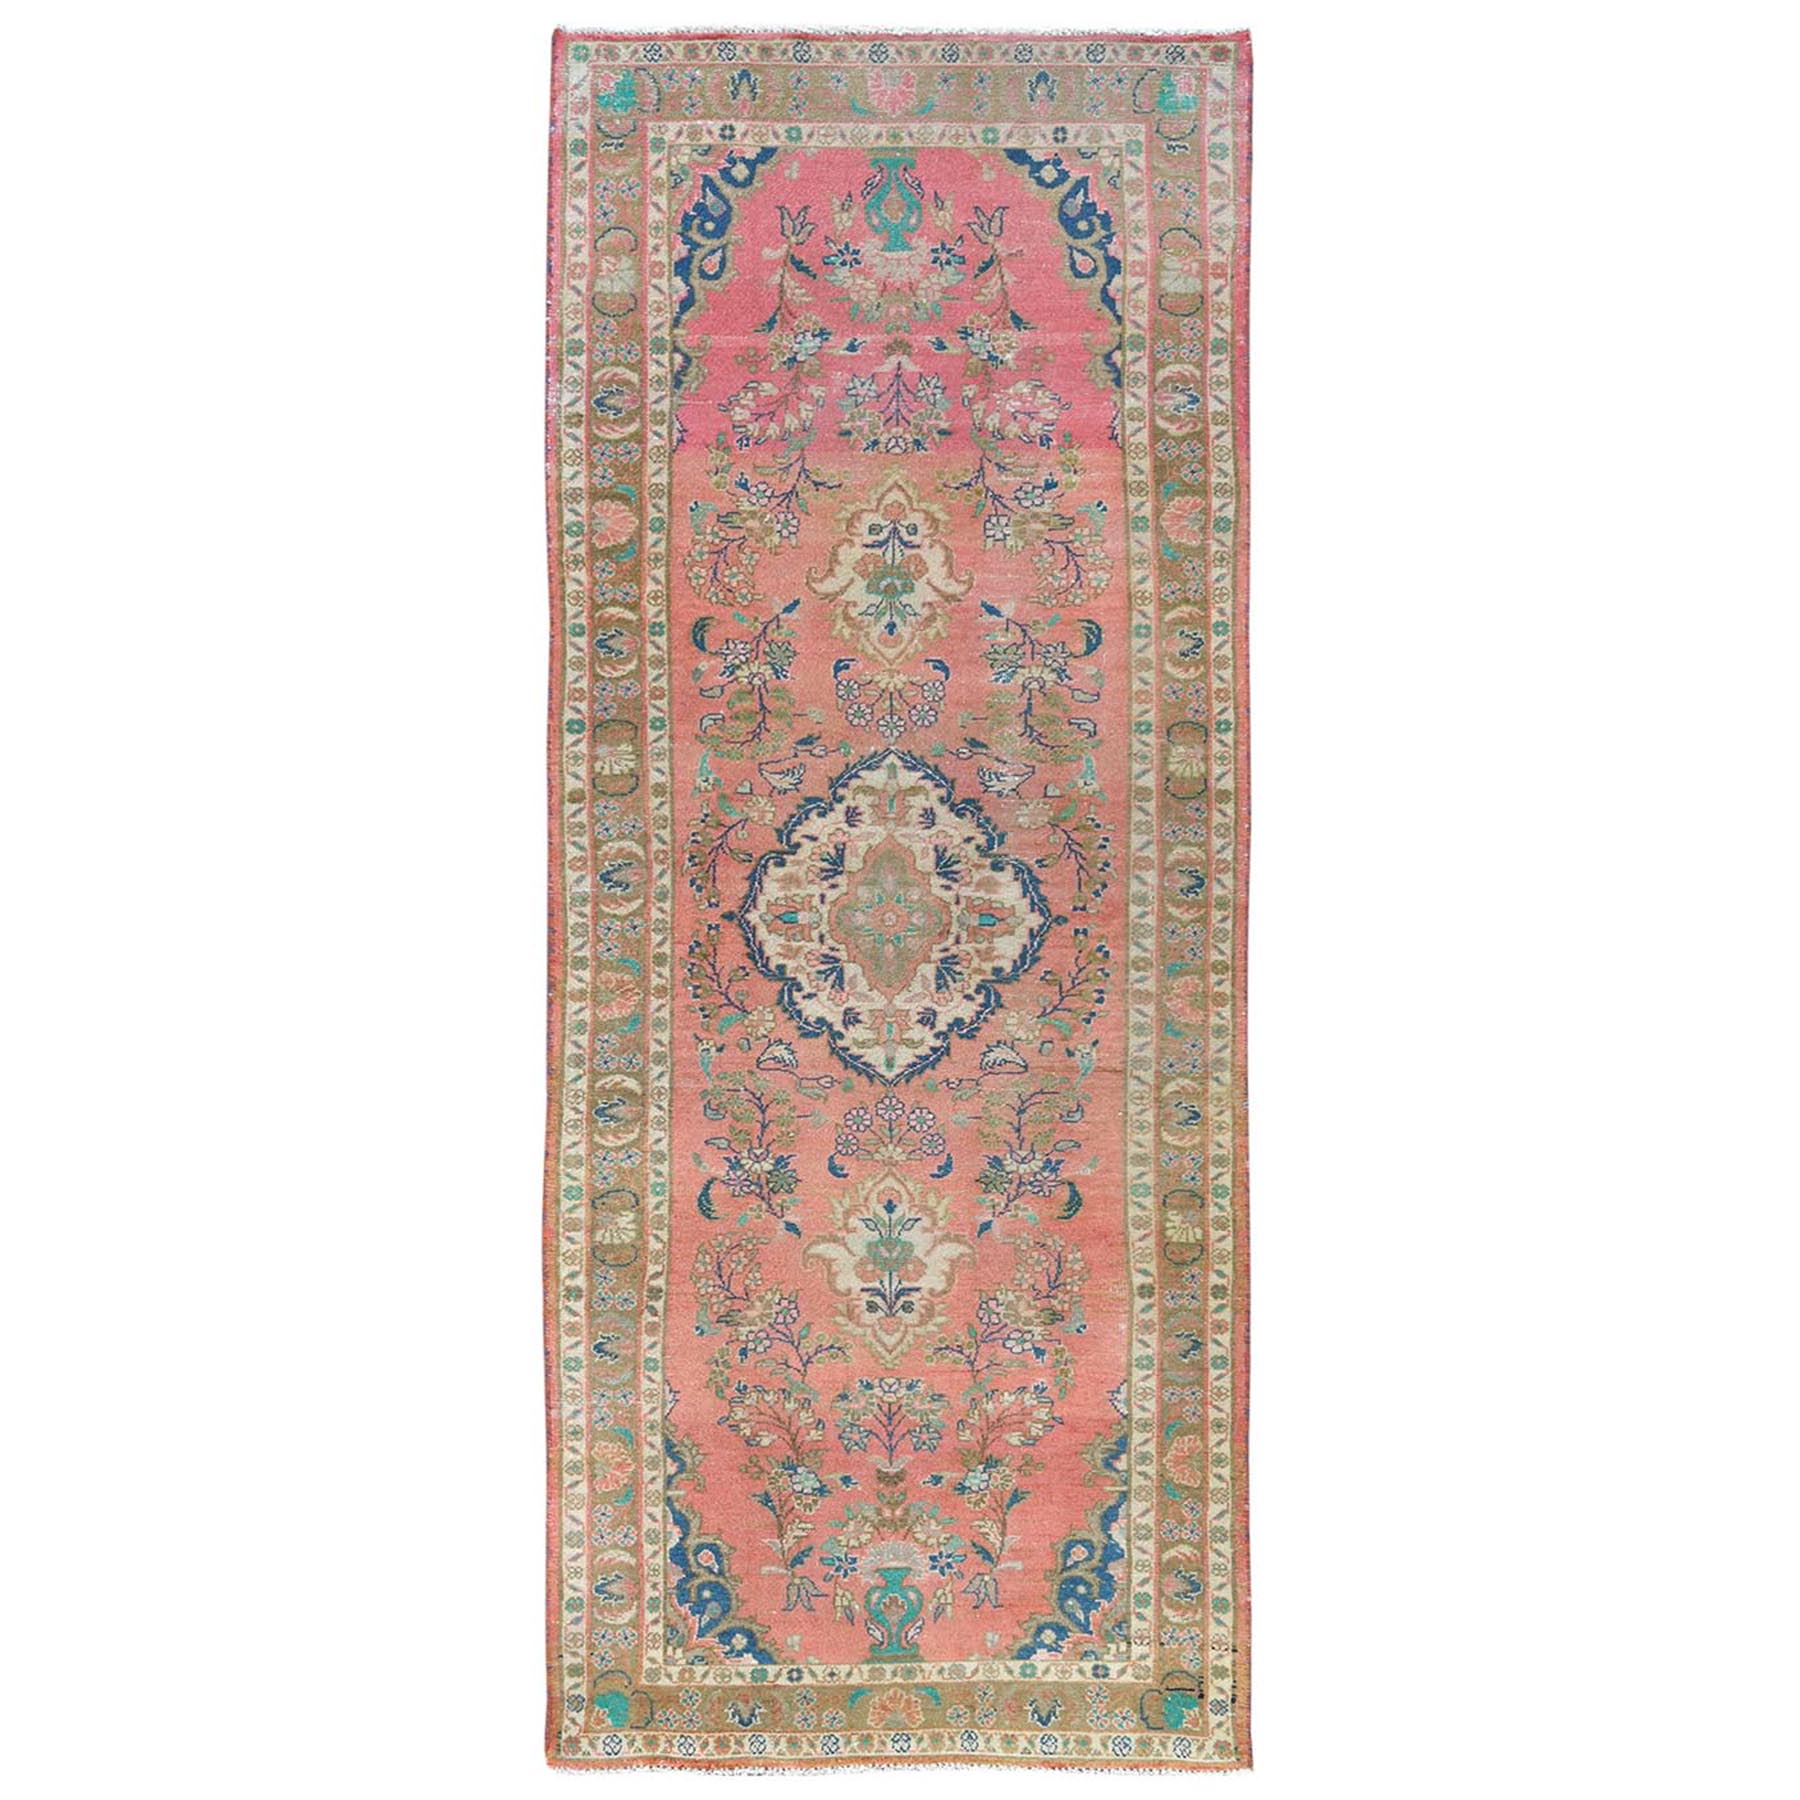 3'3"x10' Coral and Pink Colors Vintage Persian Bibikabad with Flower Vase Design, Abrash, Worn Down, Hand Woven Pure Wool, Distressed Look Wide Runner Oriental Rug 